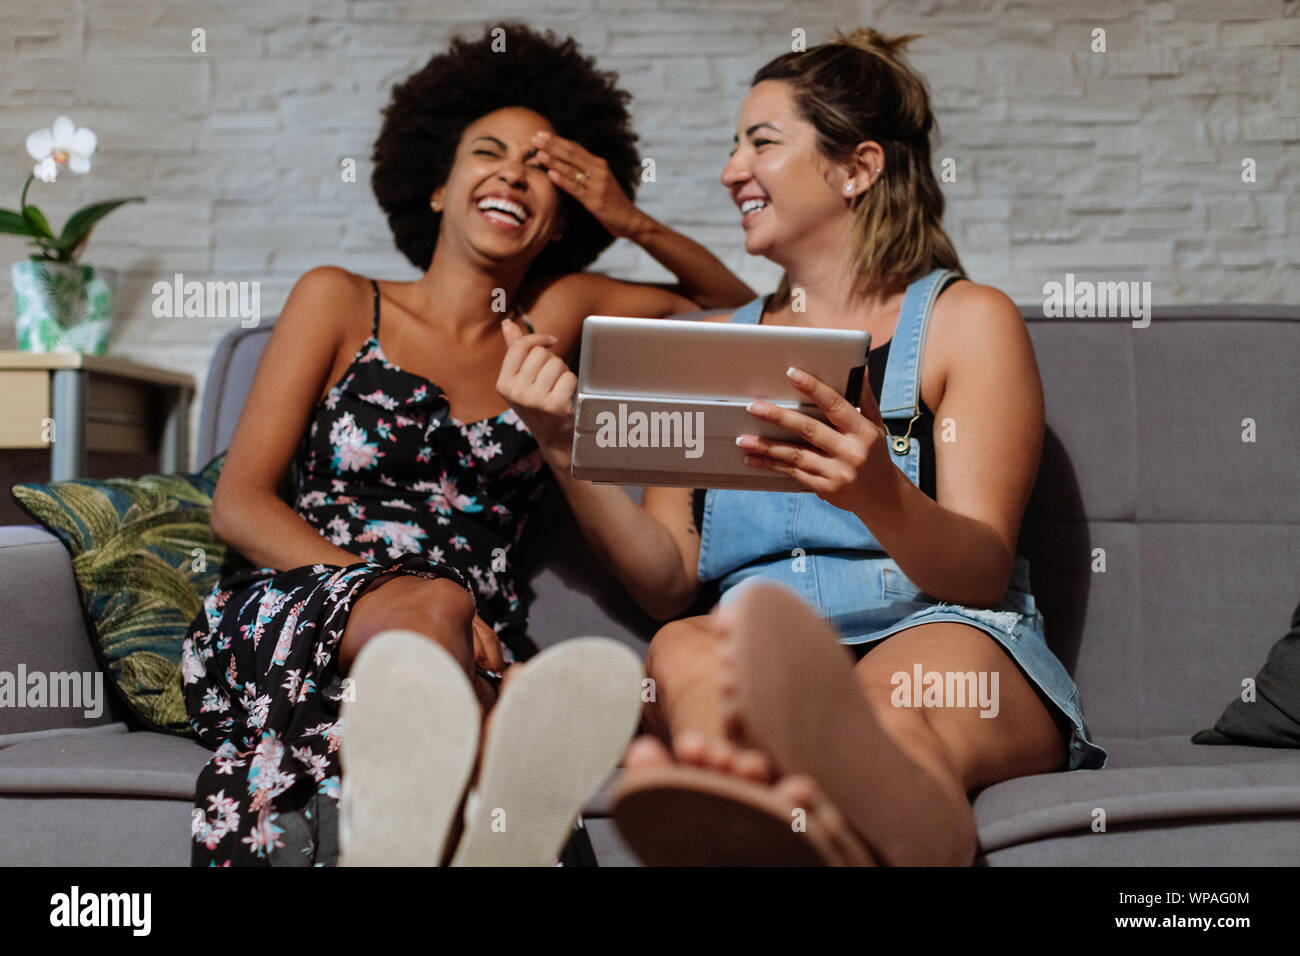 Two women looking at the tablet Stock Photo